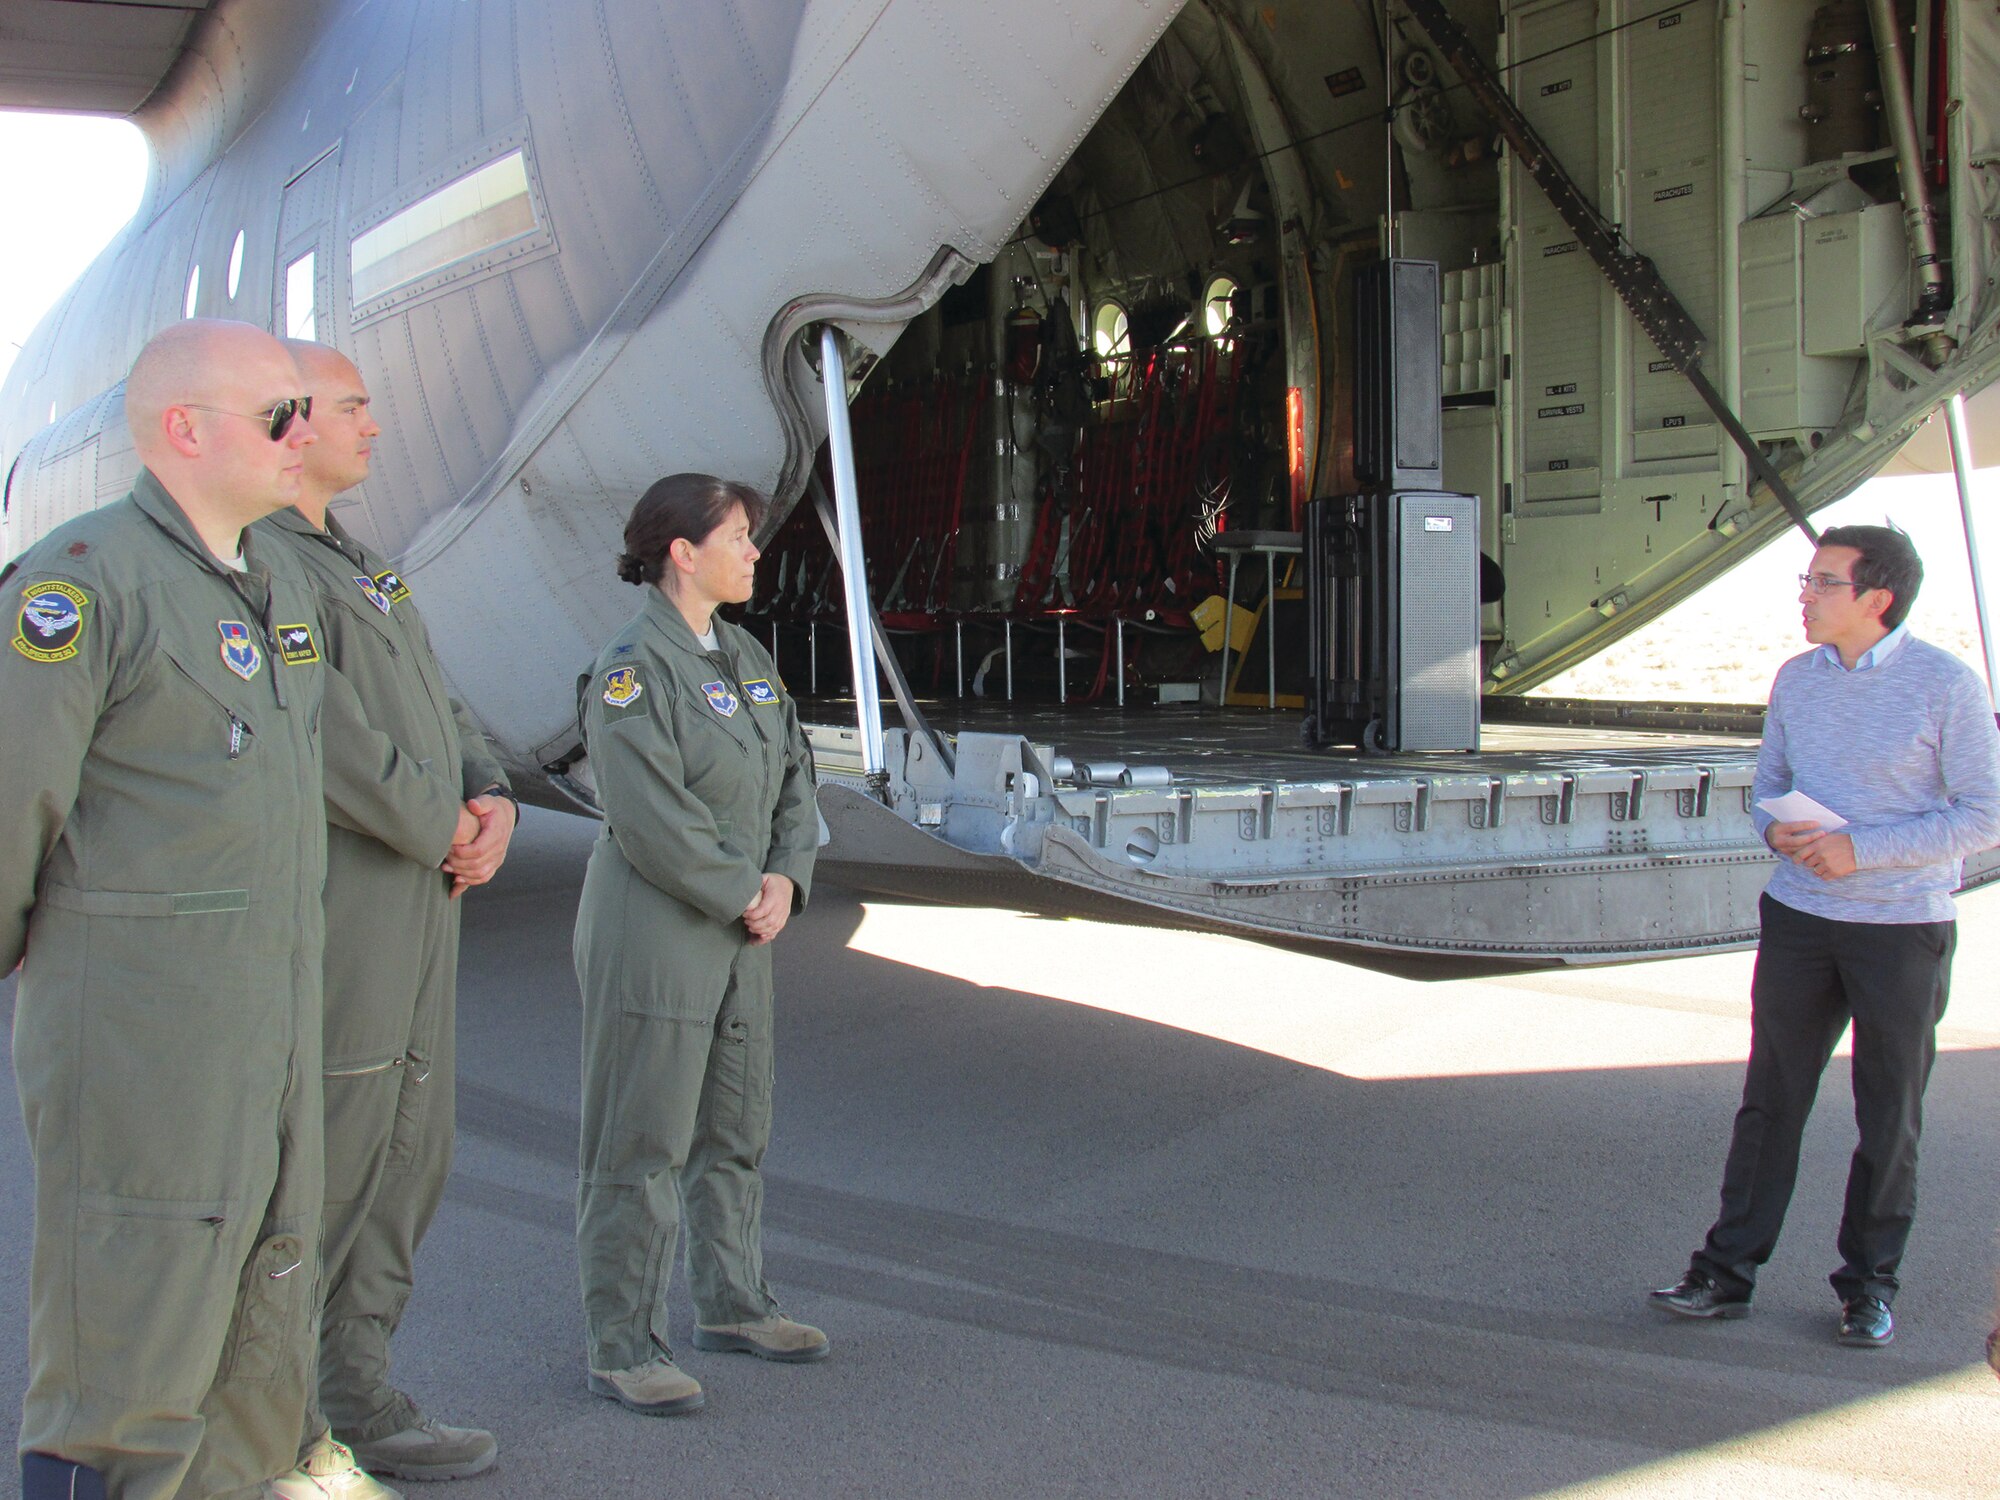 From left, MC-130J pilots Maj. Dennis Napier and Capt. Brett Agatep, and 58th Special Operations Wing Commander Col. Brenda Cartier listen as Belen Mayor Jerah Cordova welcomes them to the Belen Alexander Municipal Airport, where aircrews can train under a new joint-use agreement. Napier and Agatep are the first pilots to fly into the airport under the agreement. (Photo by Argen Duncan)